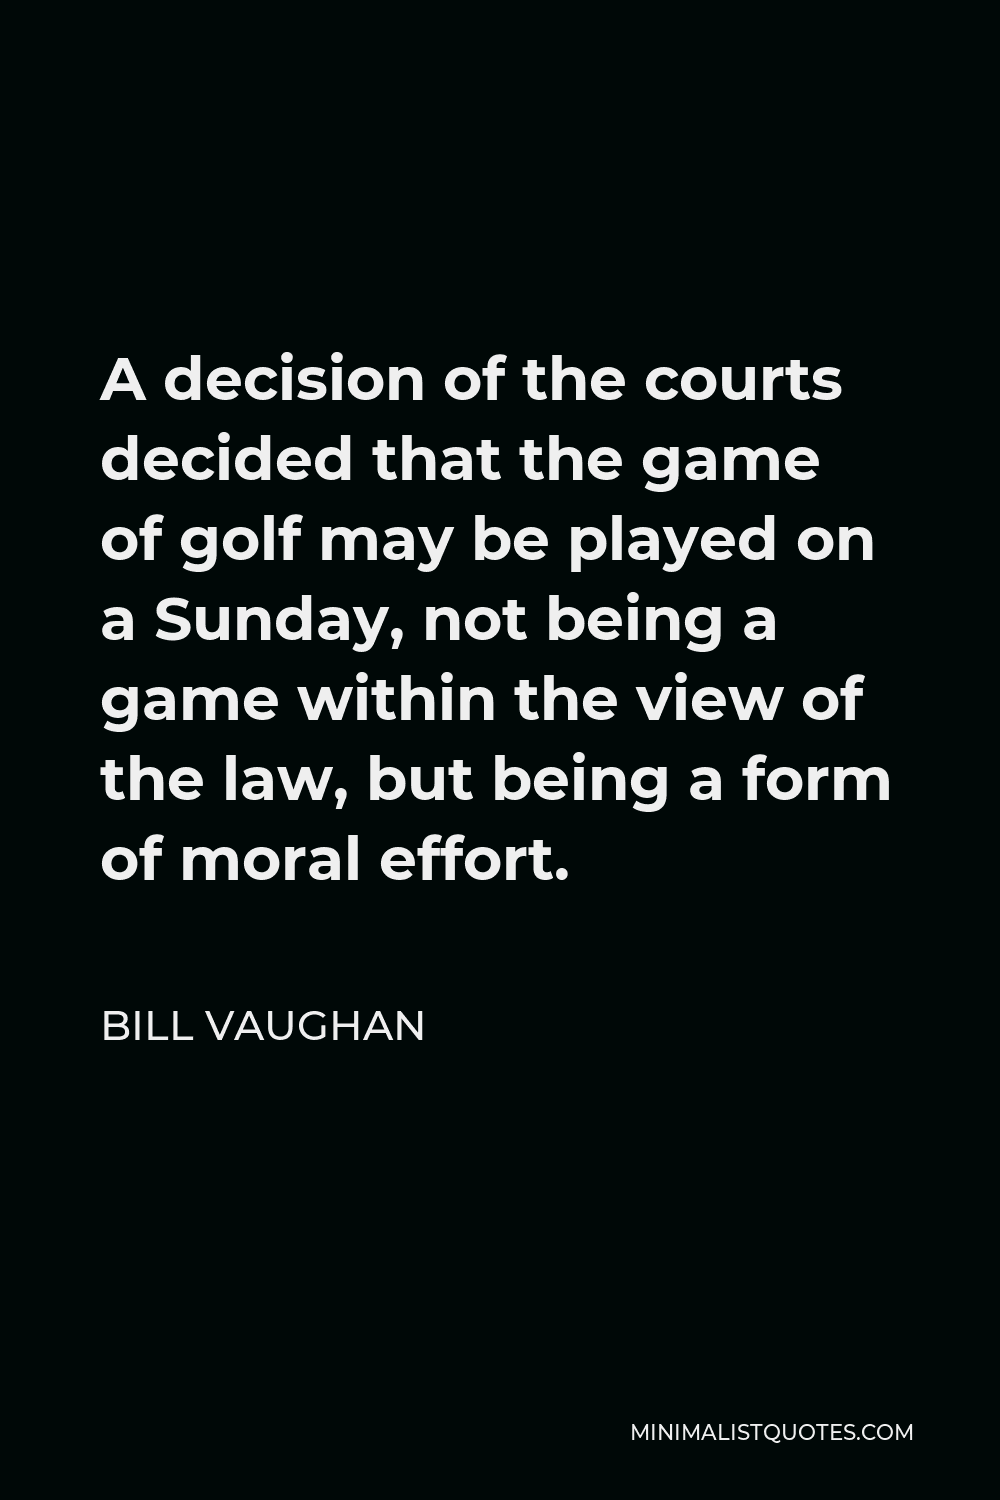 Bill Vaughan Quote - A decision of the courts decided that the game of golf may be played on a Sunday, not being a game within the view of the law, but being a form of moral effort.